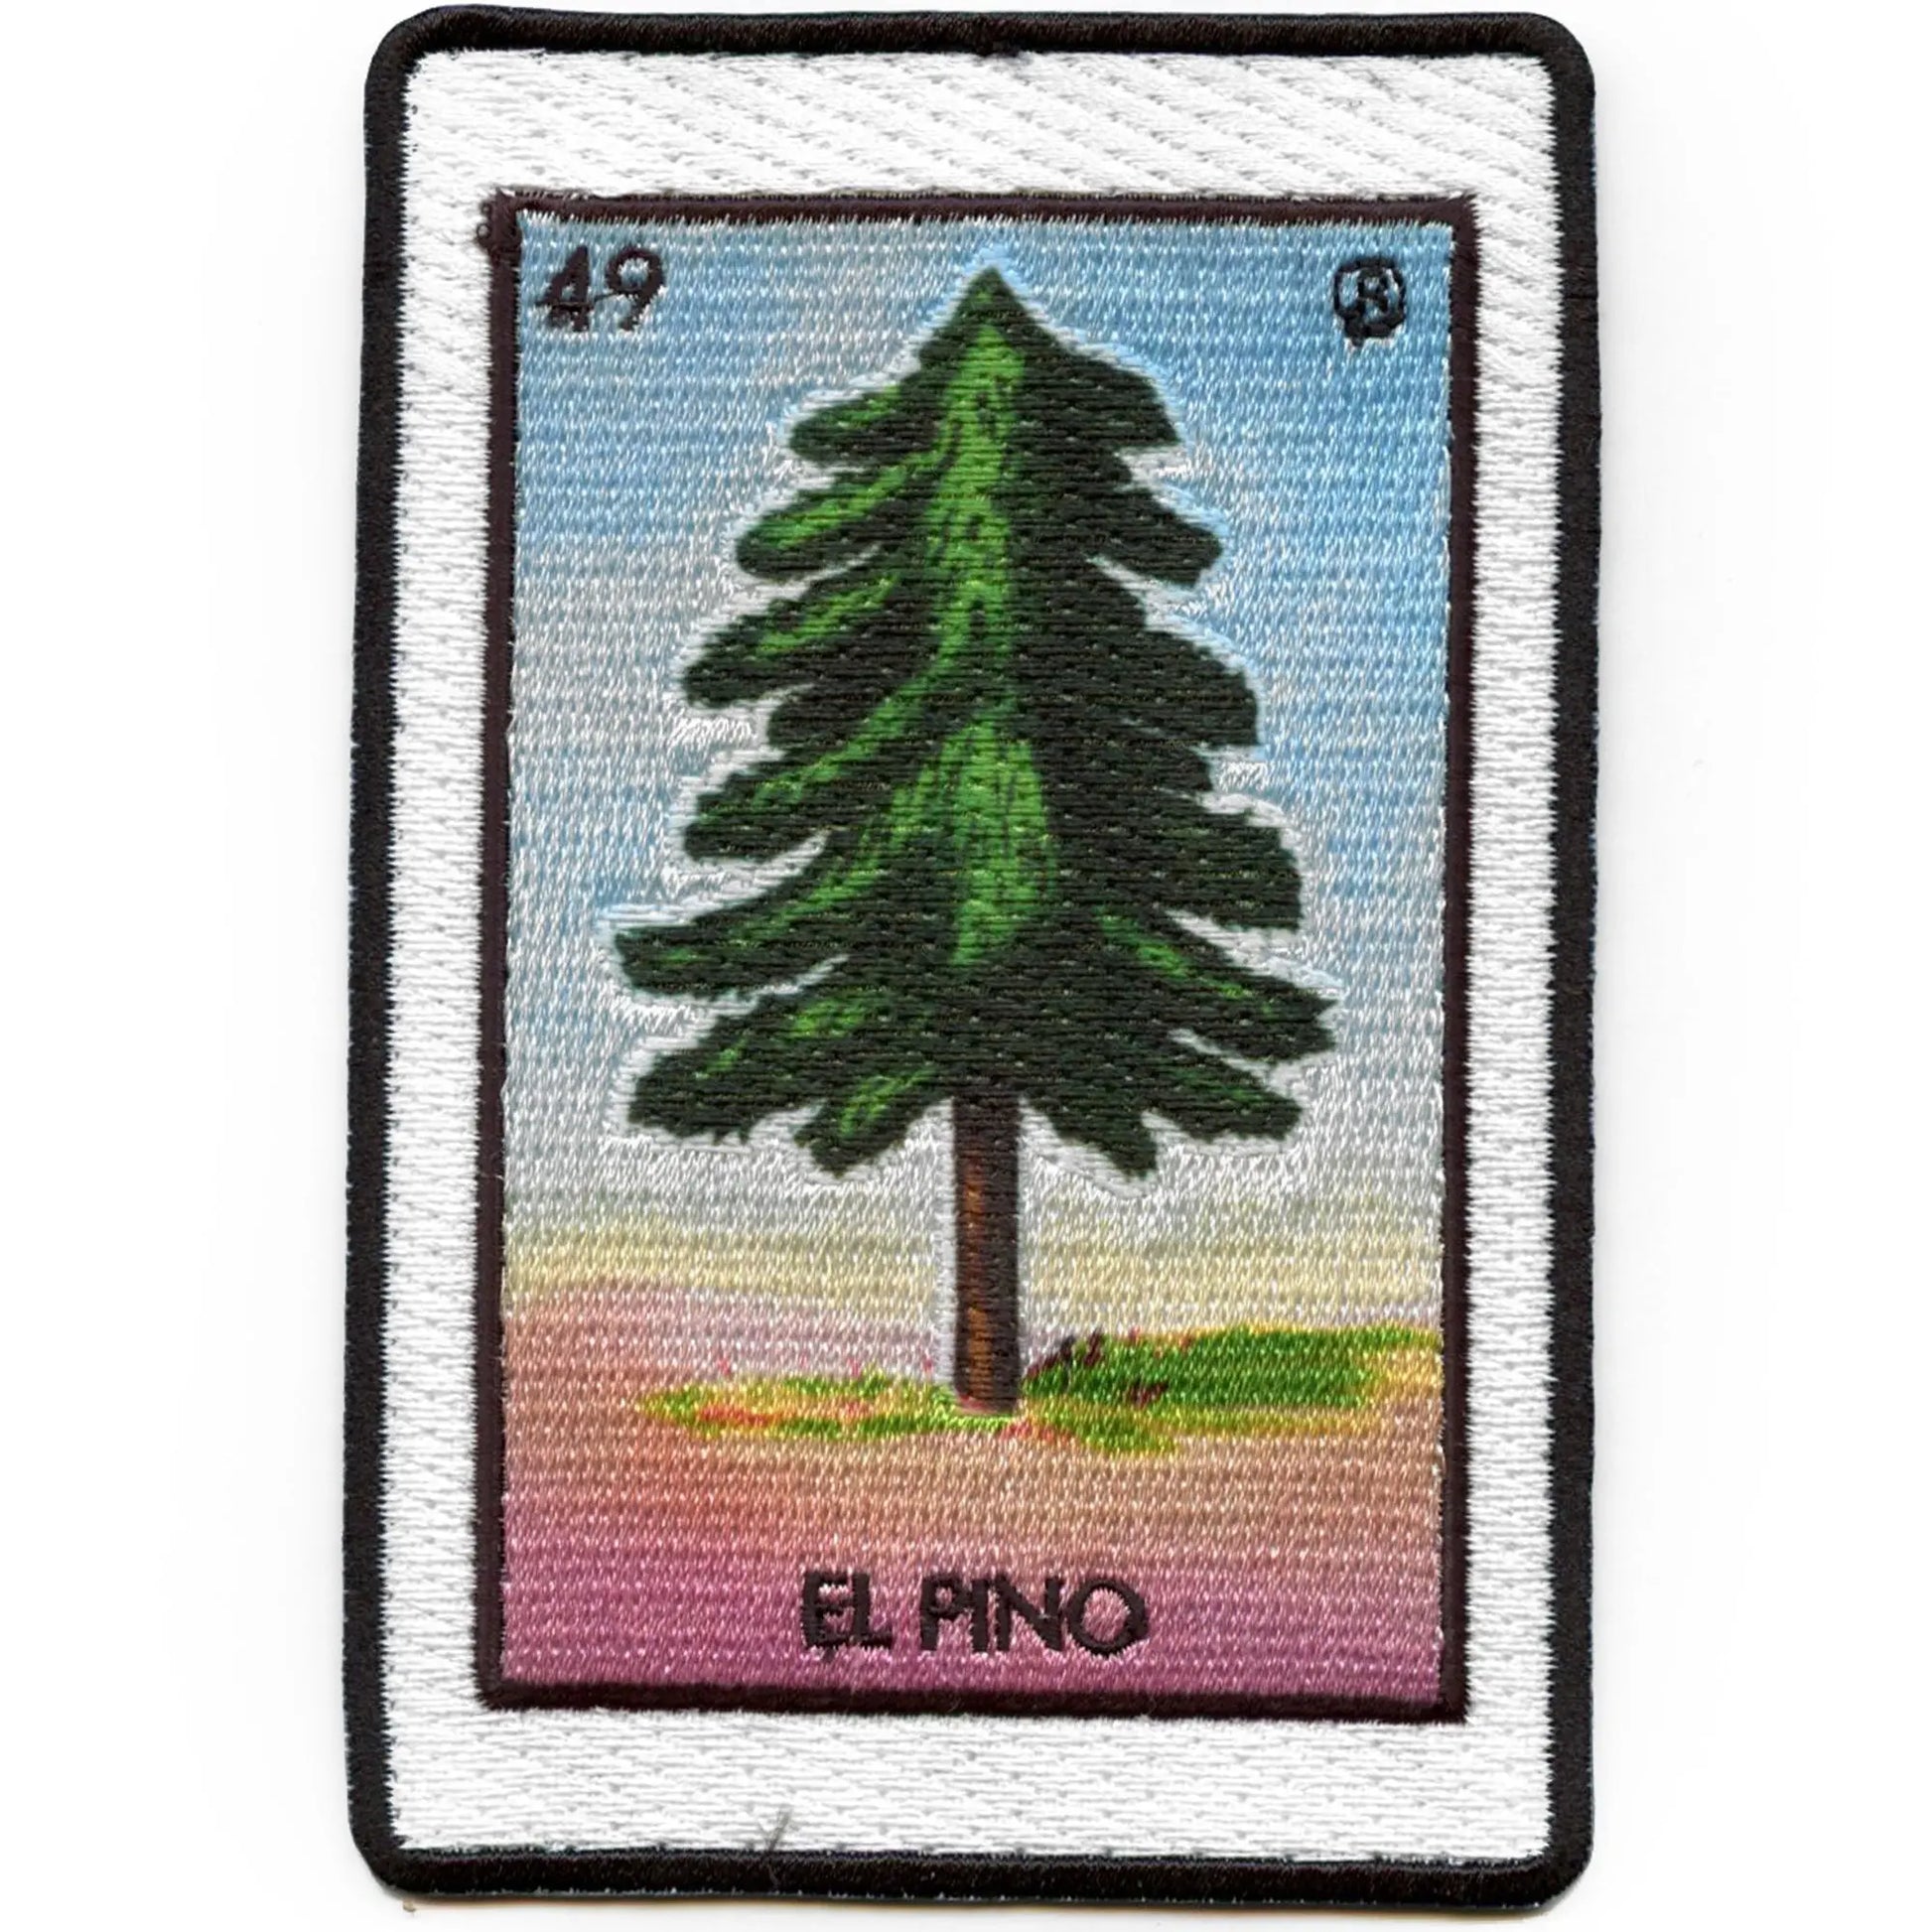 El Pino 49 Patch Mexican Loteria Card Sublimated Embroidery Iron On